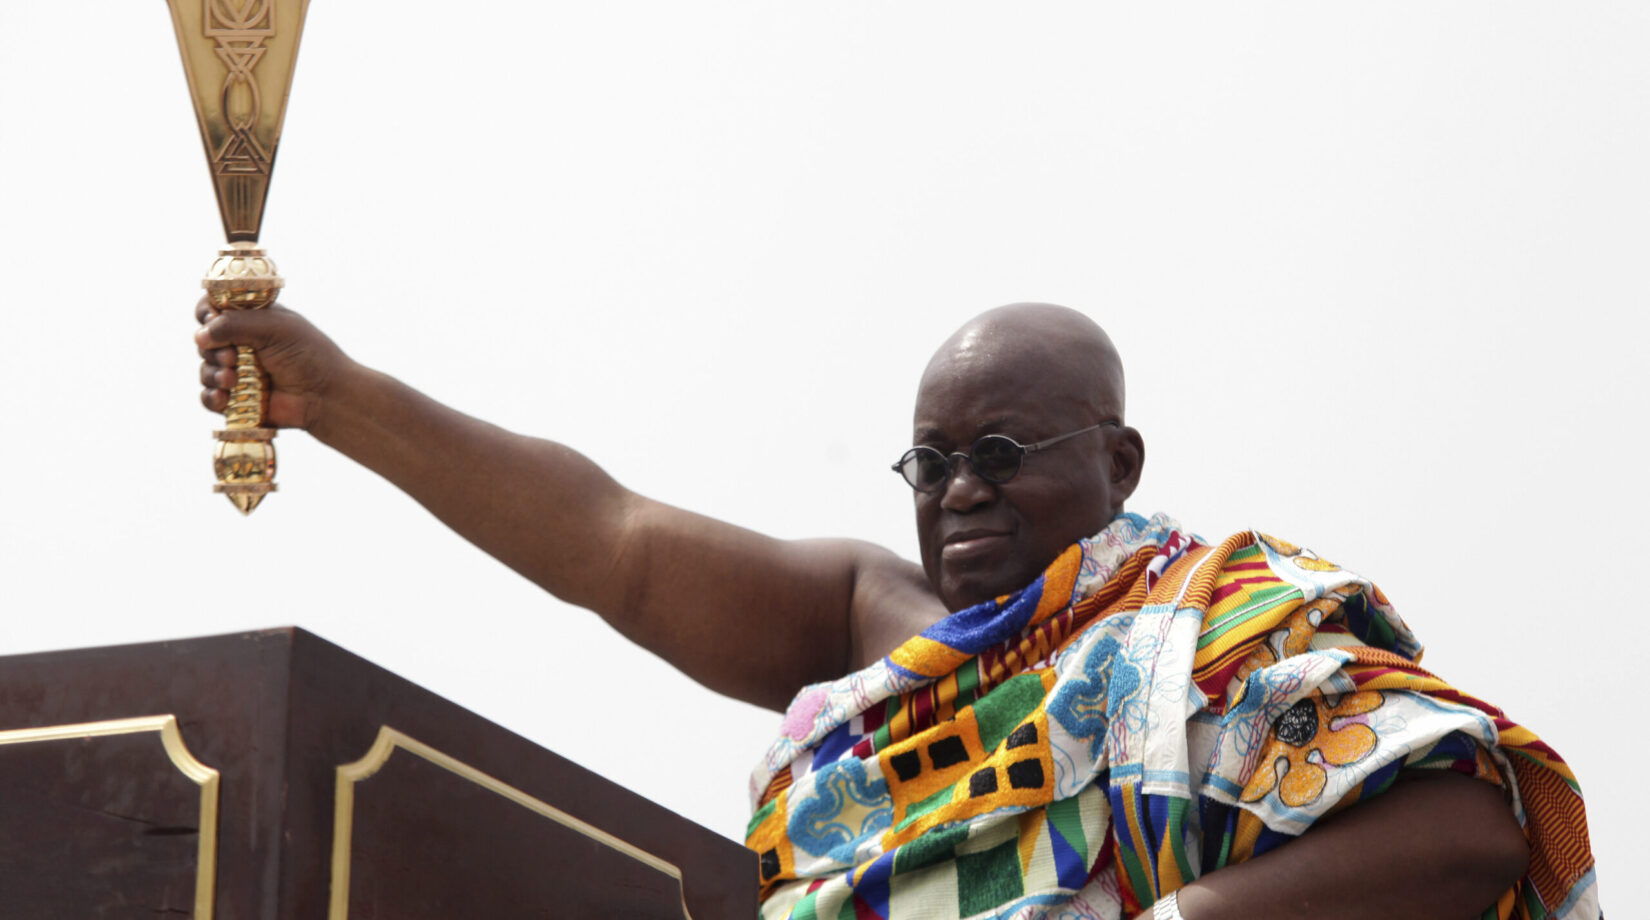 War against galamsey:KEEP AN EAGLE EYES ON YOUR APPOINTEES,SECURITY AGENCIES-Chief tells Nana Addo